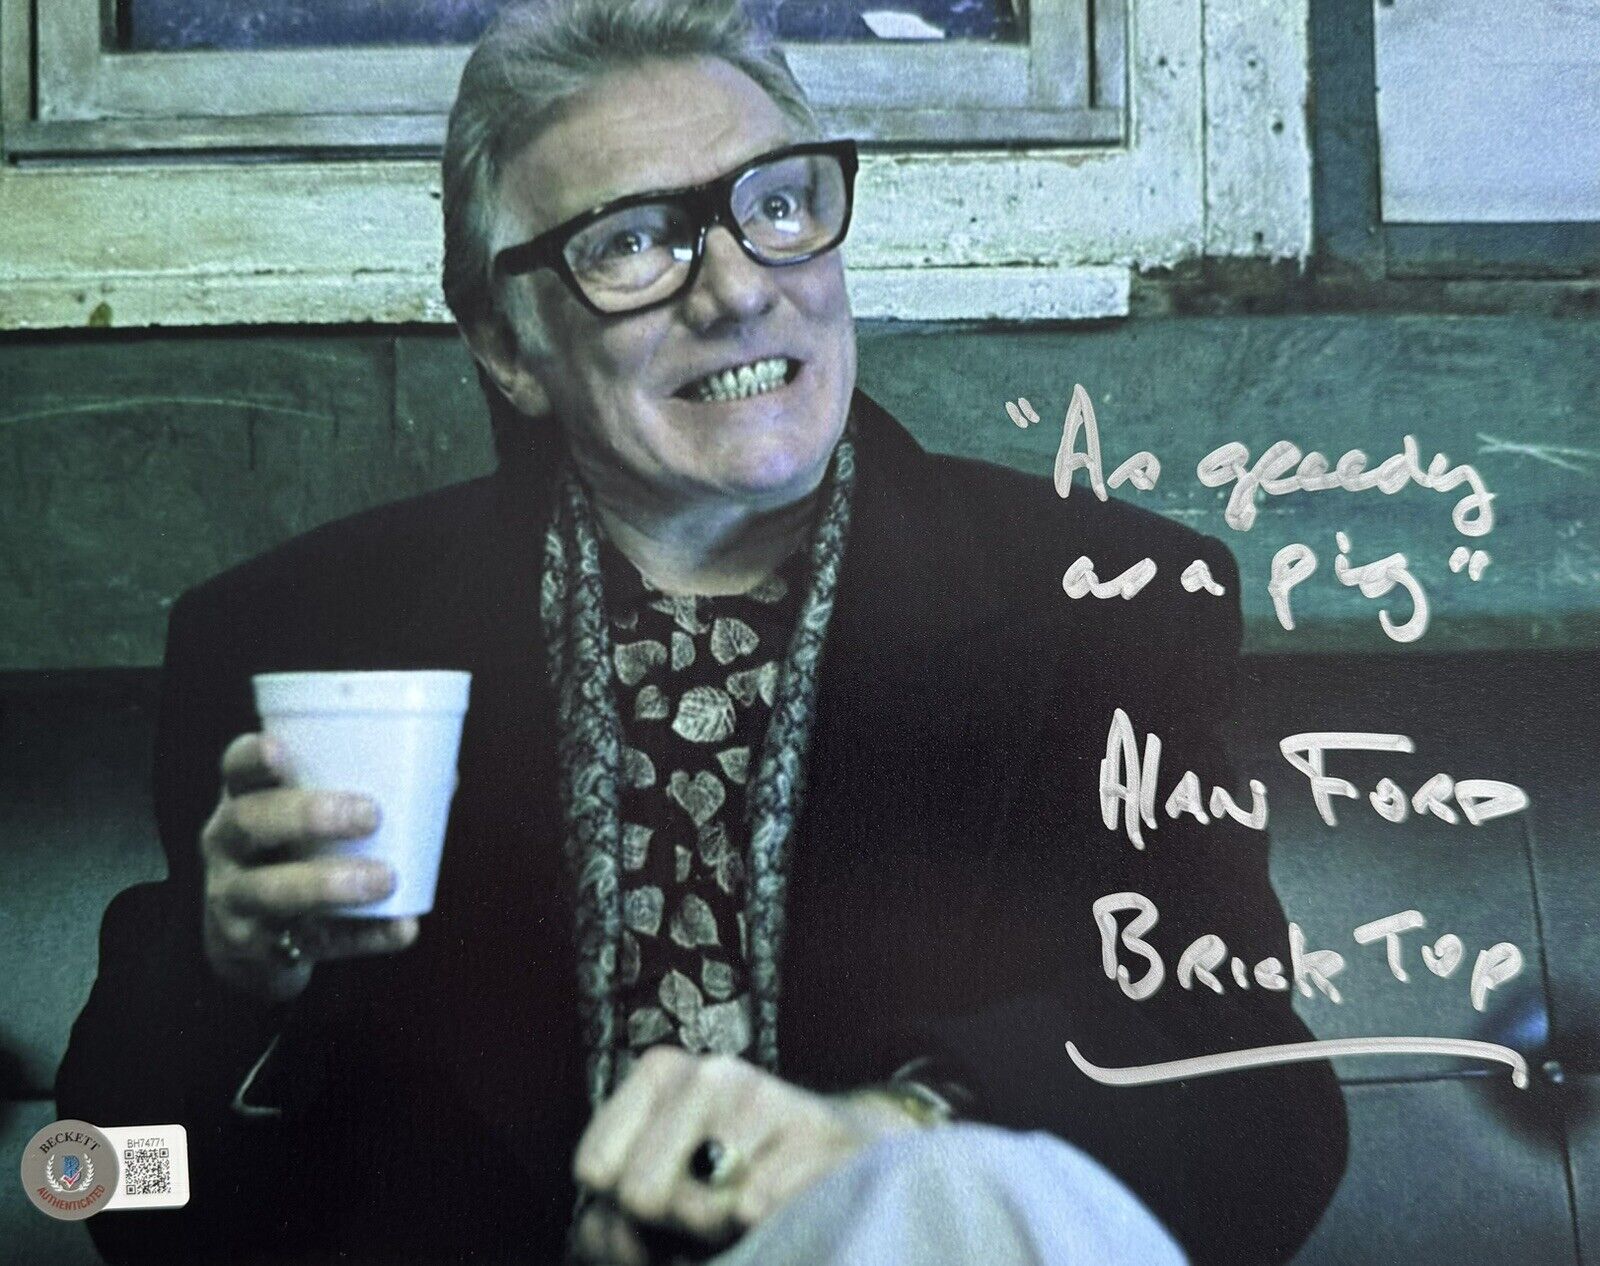 Alan Ford Signed Snatch 8x10” With “Greedy Pig” Quote - Beckett COA (Last One)